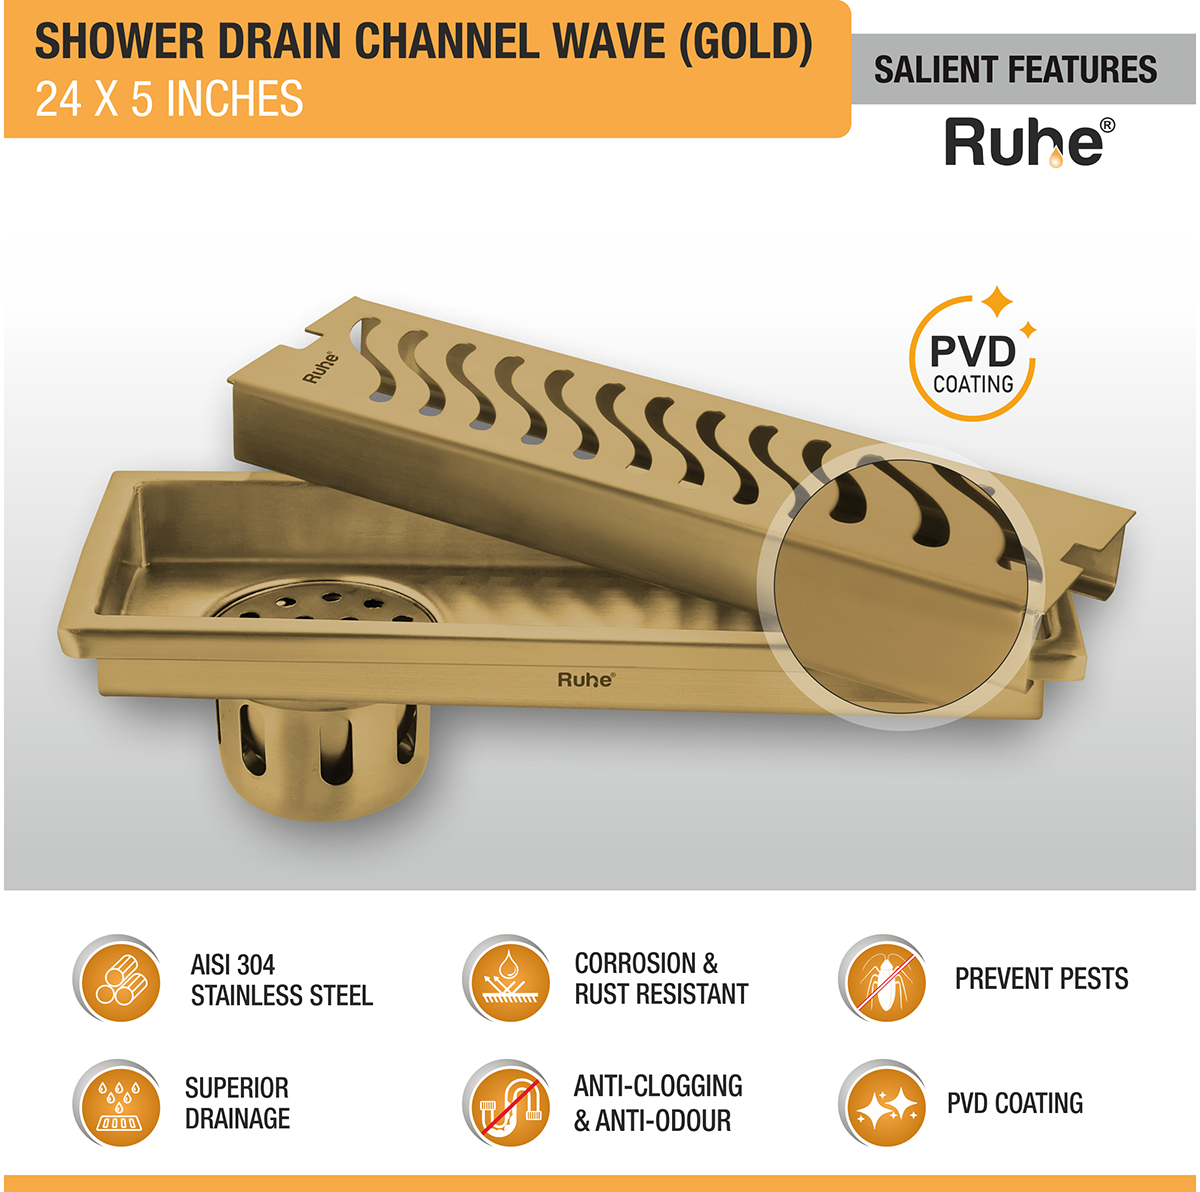 Wave Shower Drain Channel (24 x 5 Inches) YELLOW GOLD features